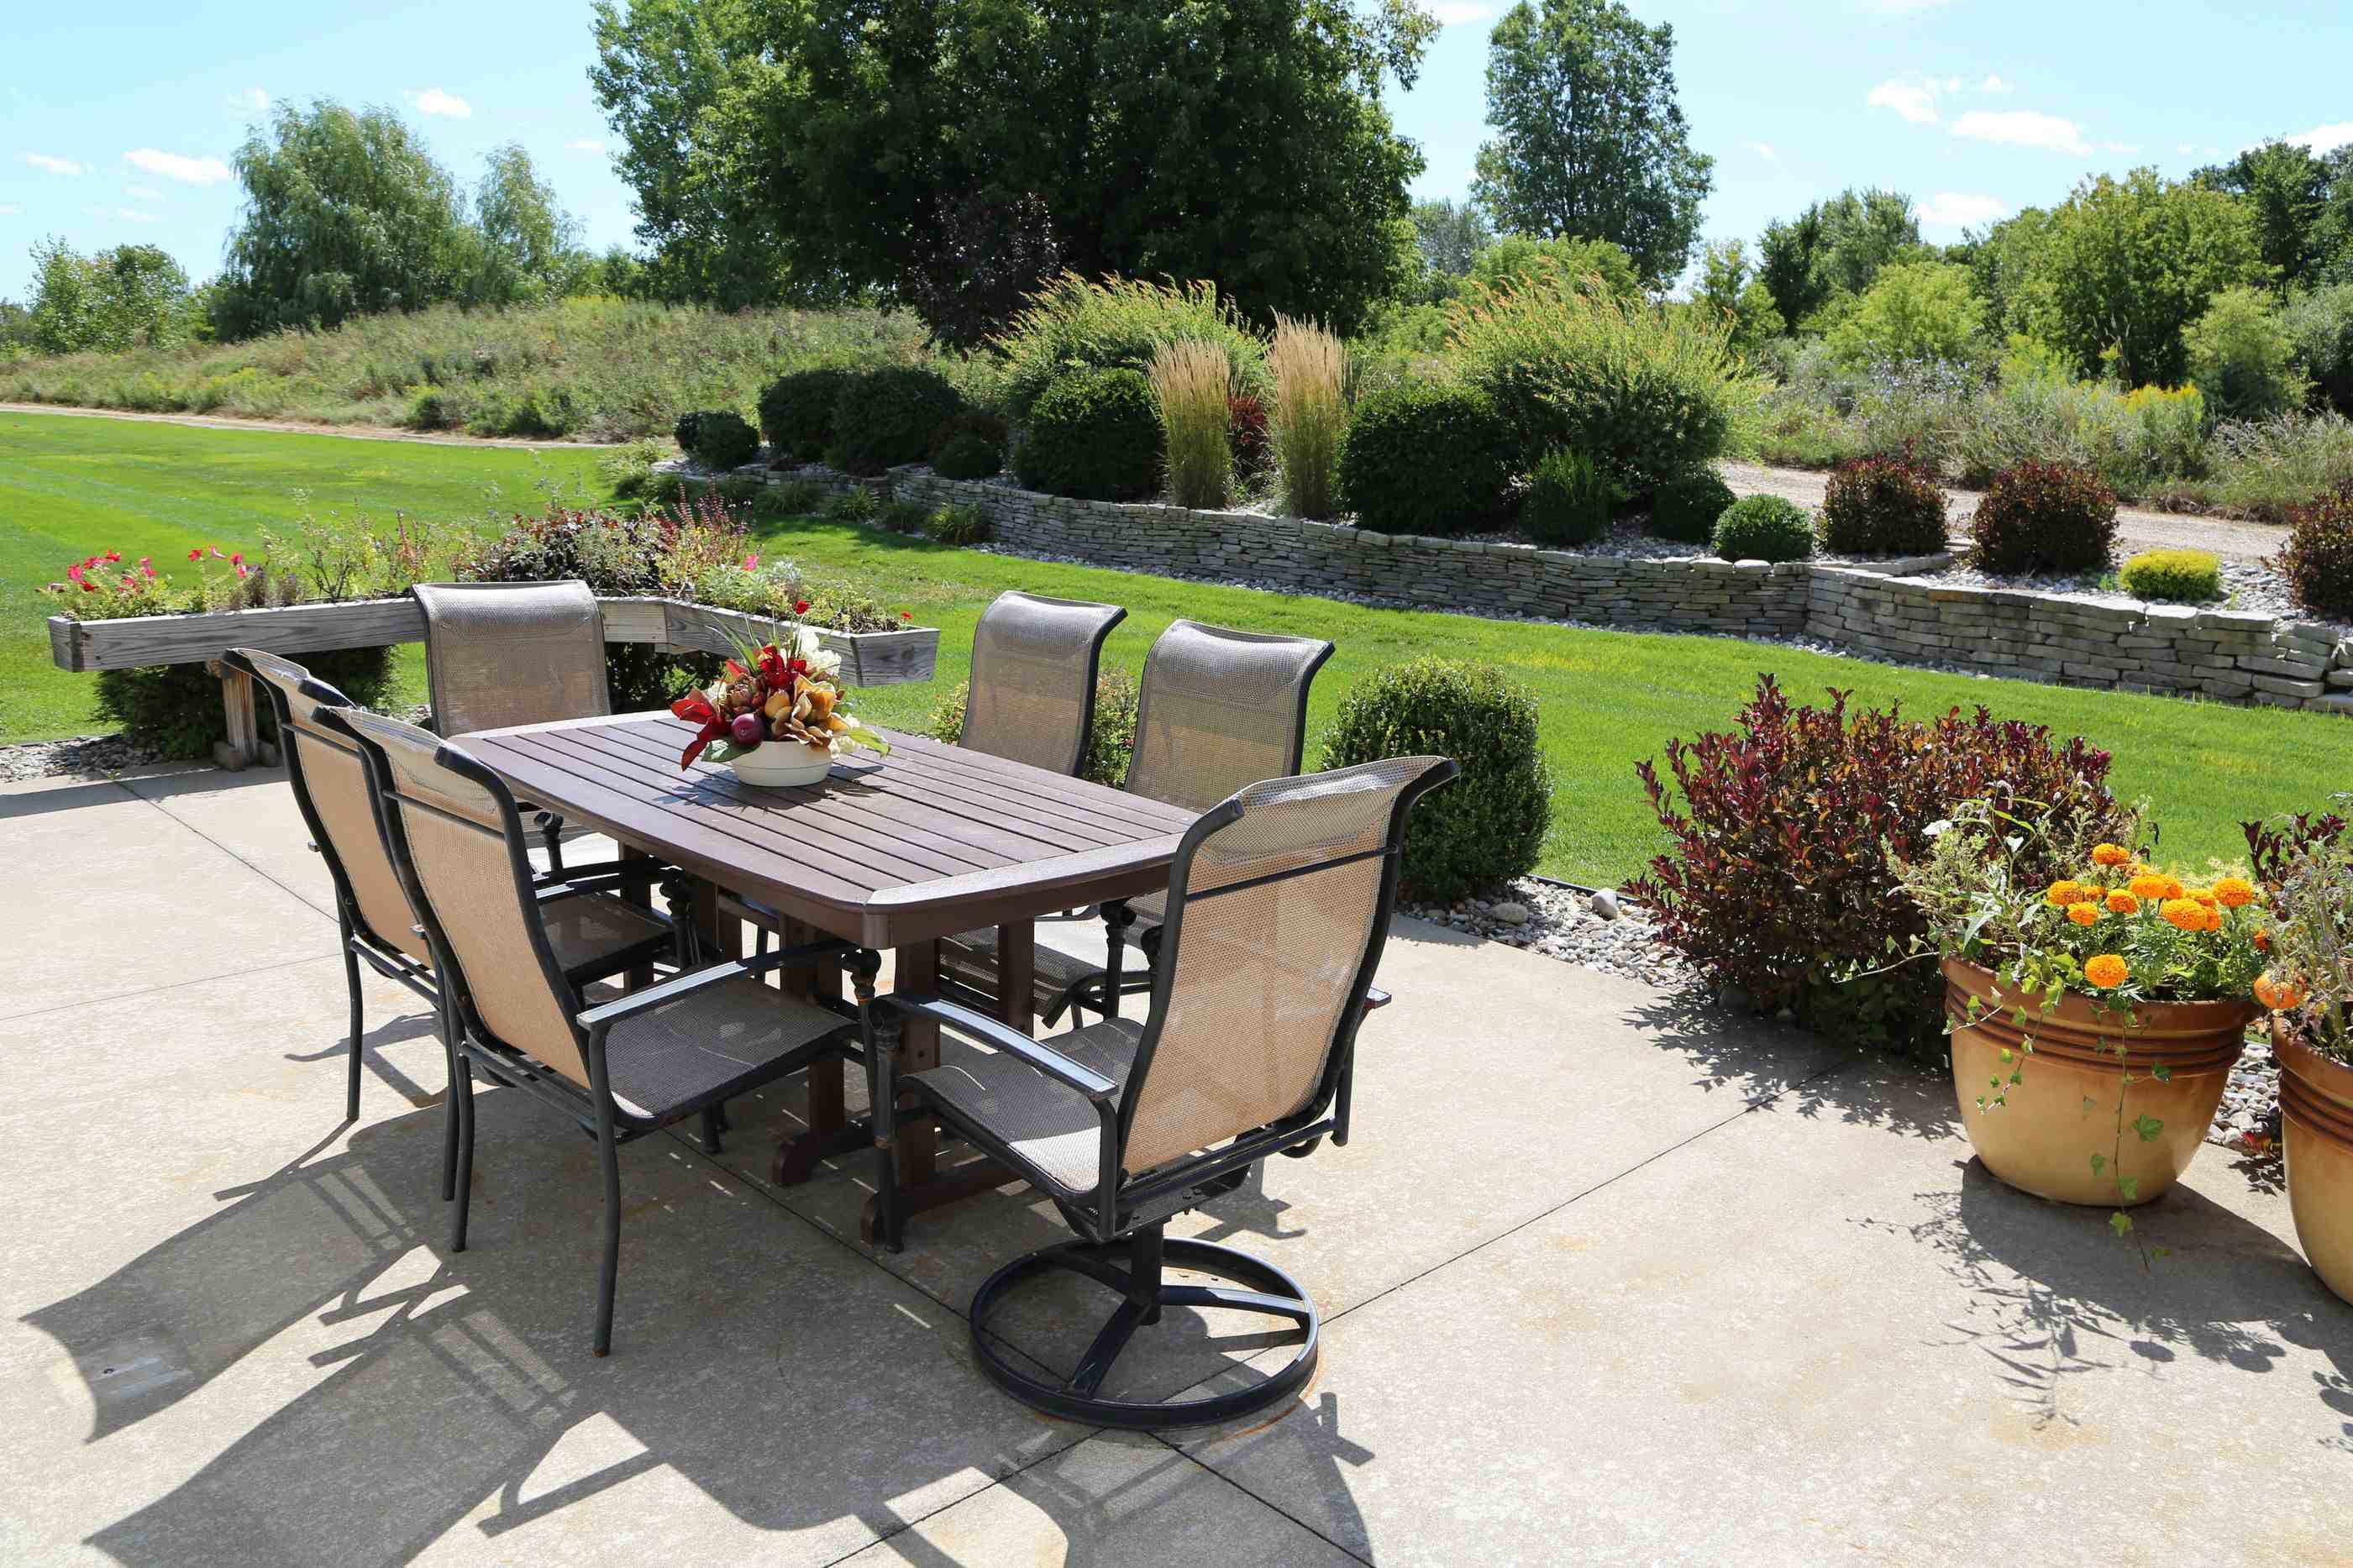 The Brook of Gladwin outdoor sitting area with view of landscaping